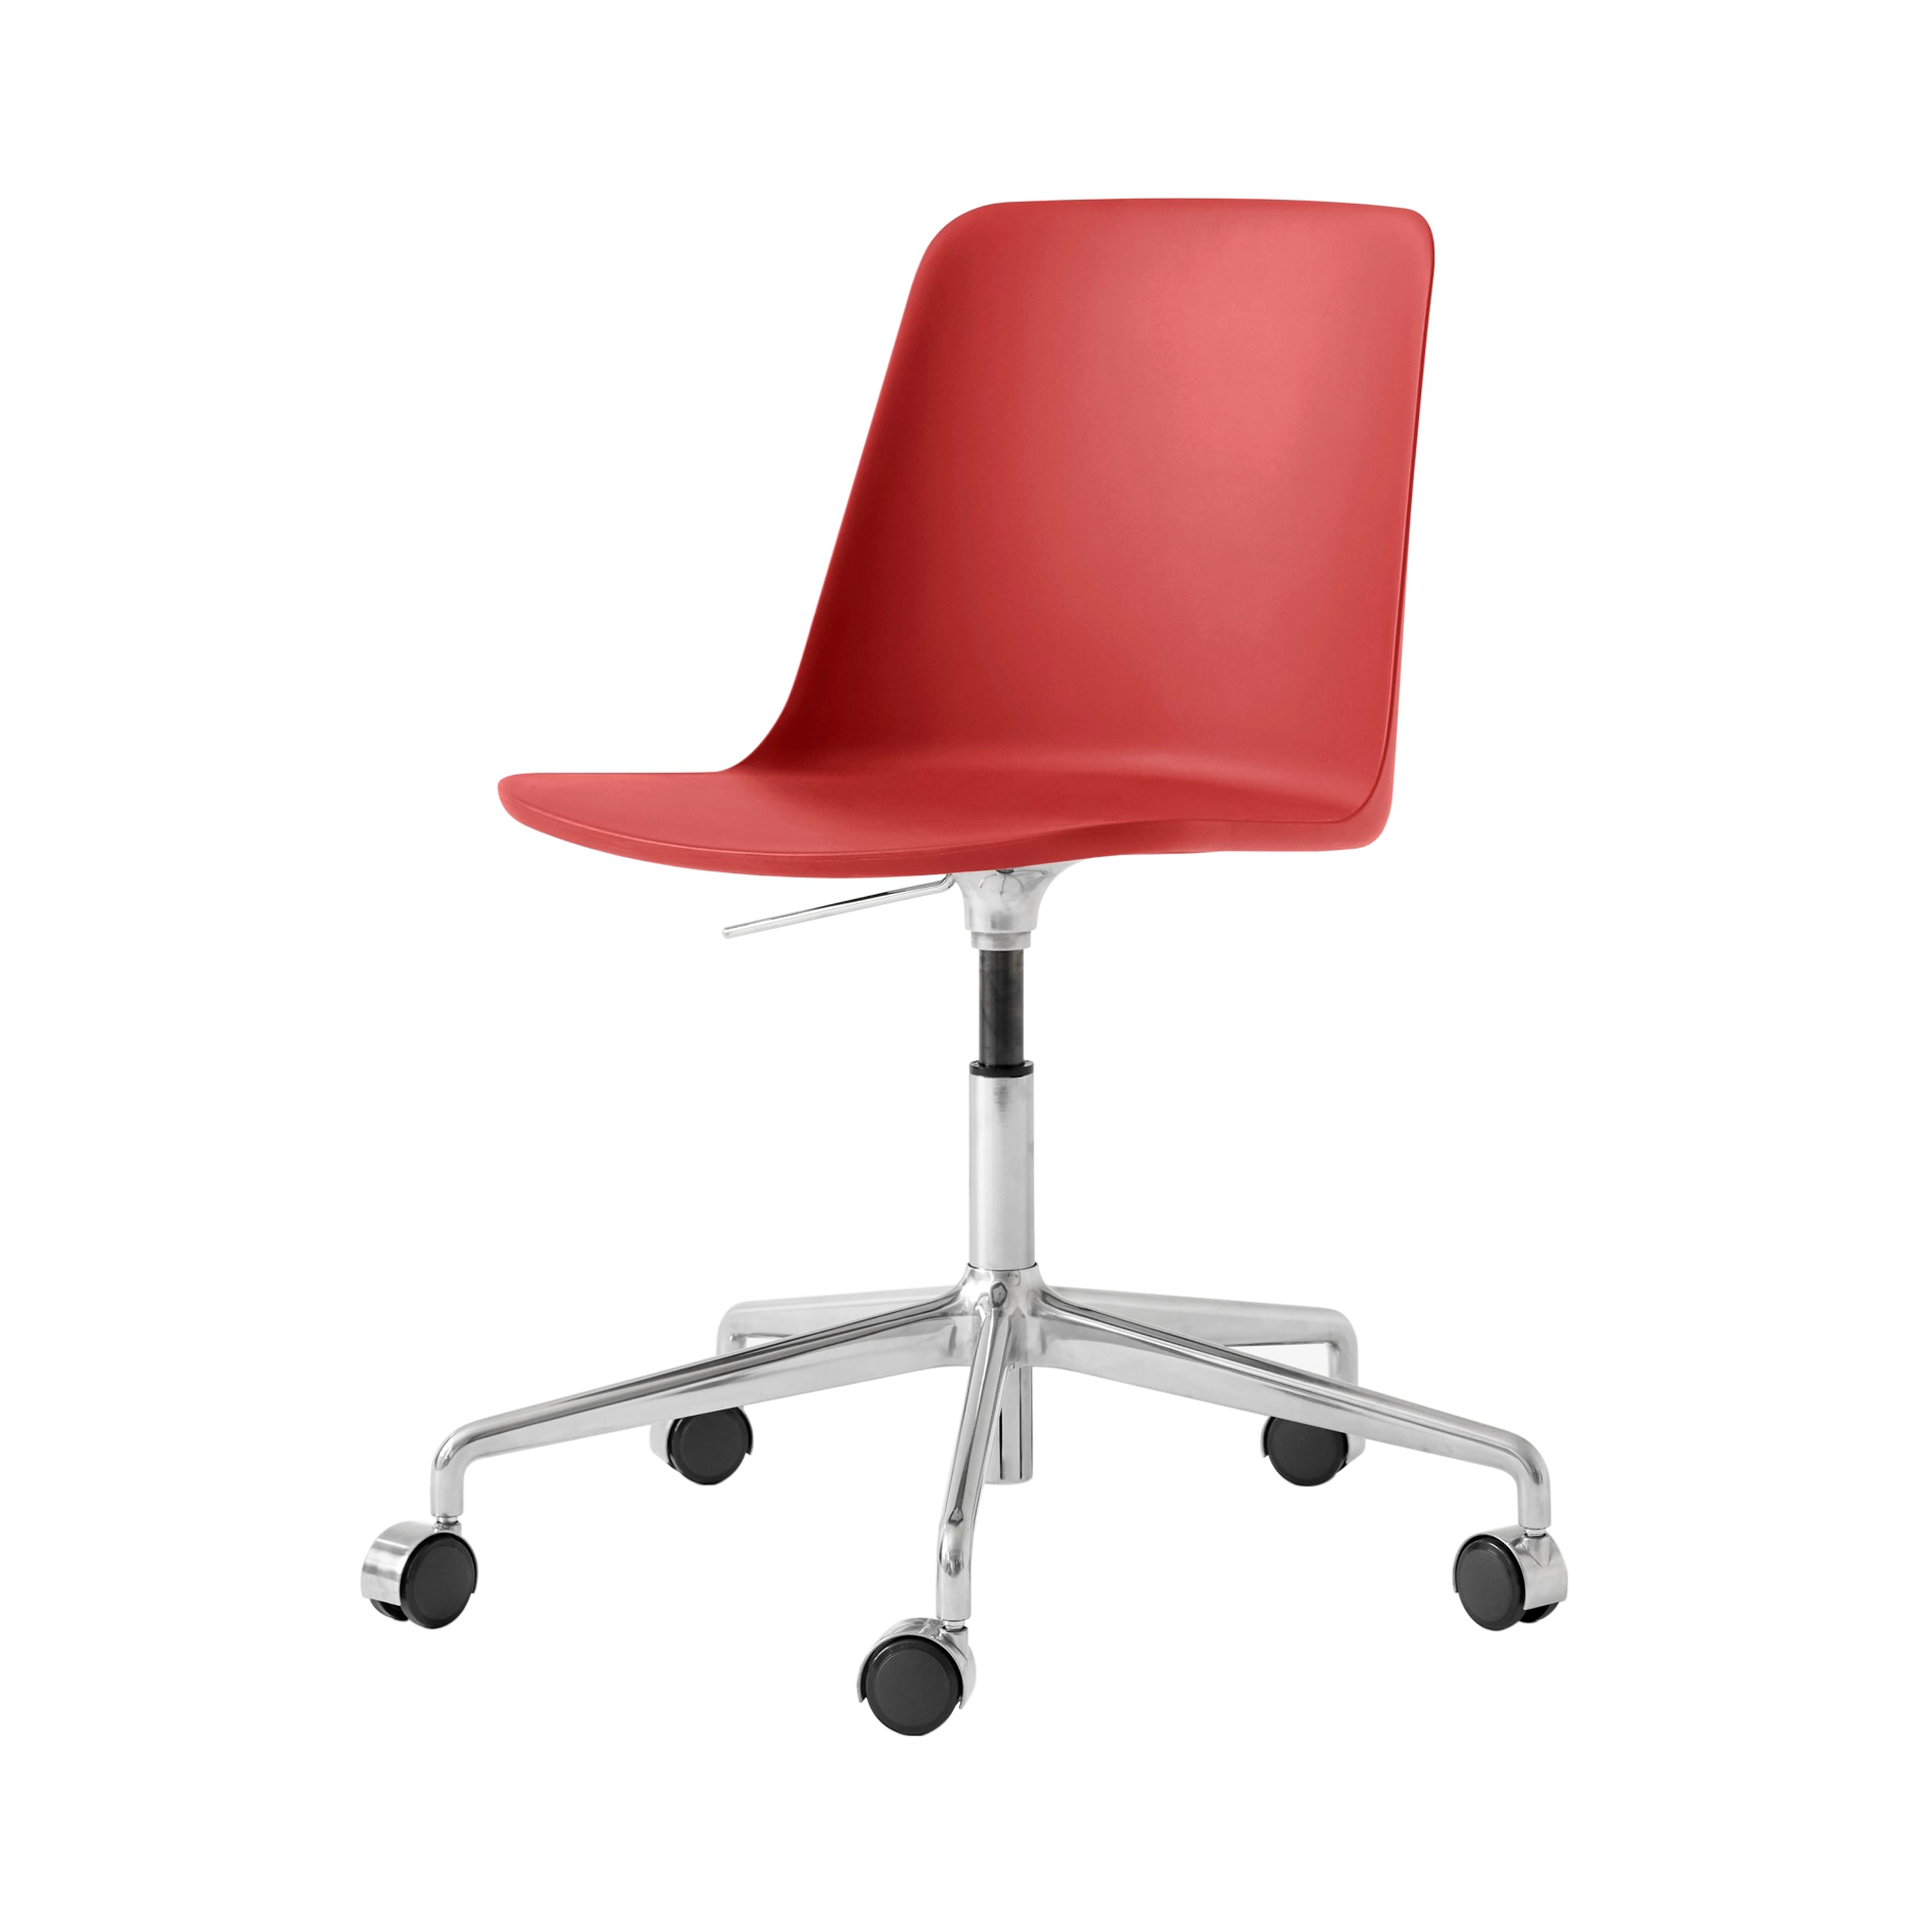 Rely Chair HW28: Vermilion Red + Polished Aluminum